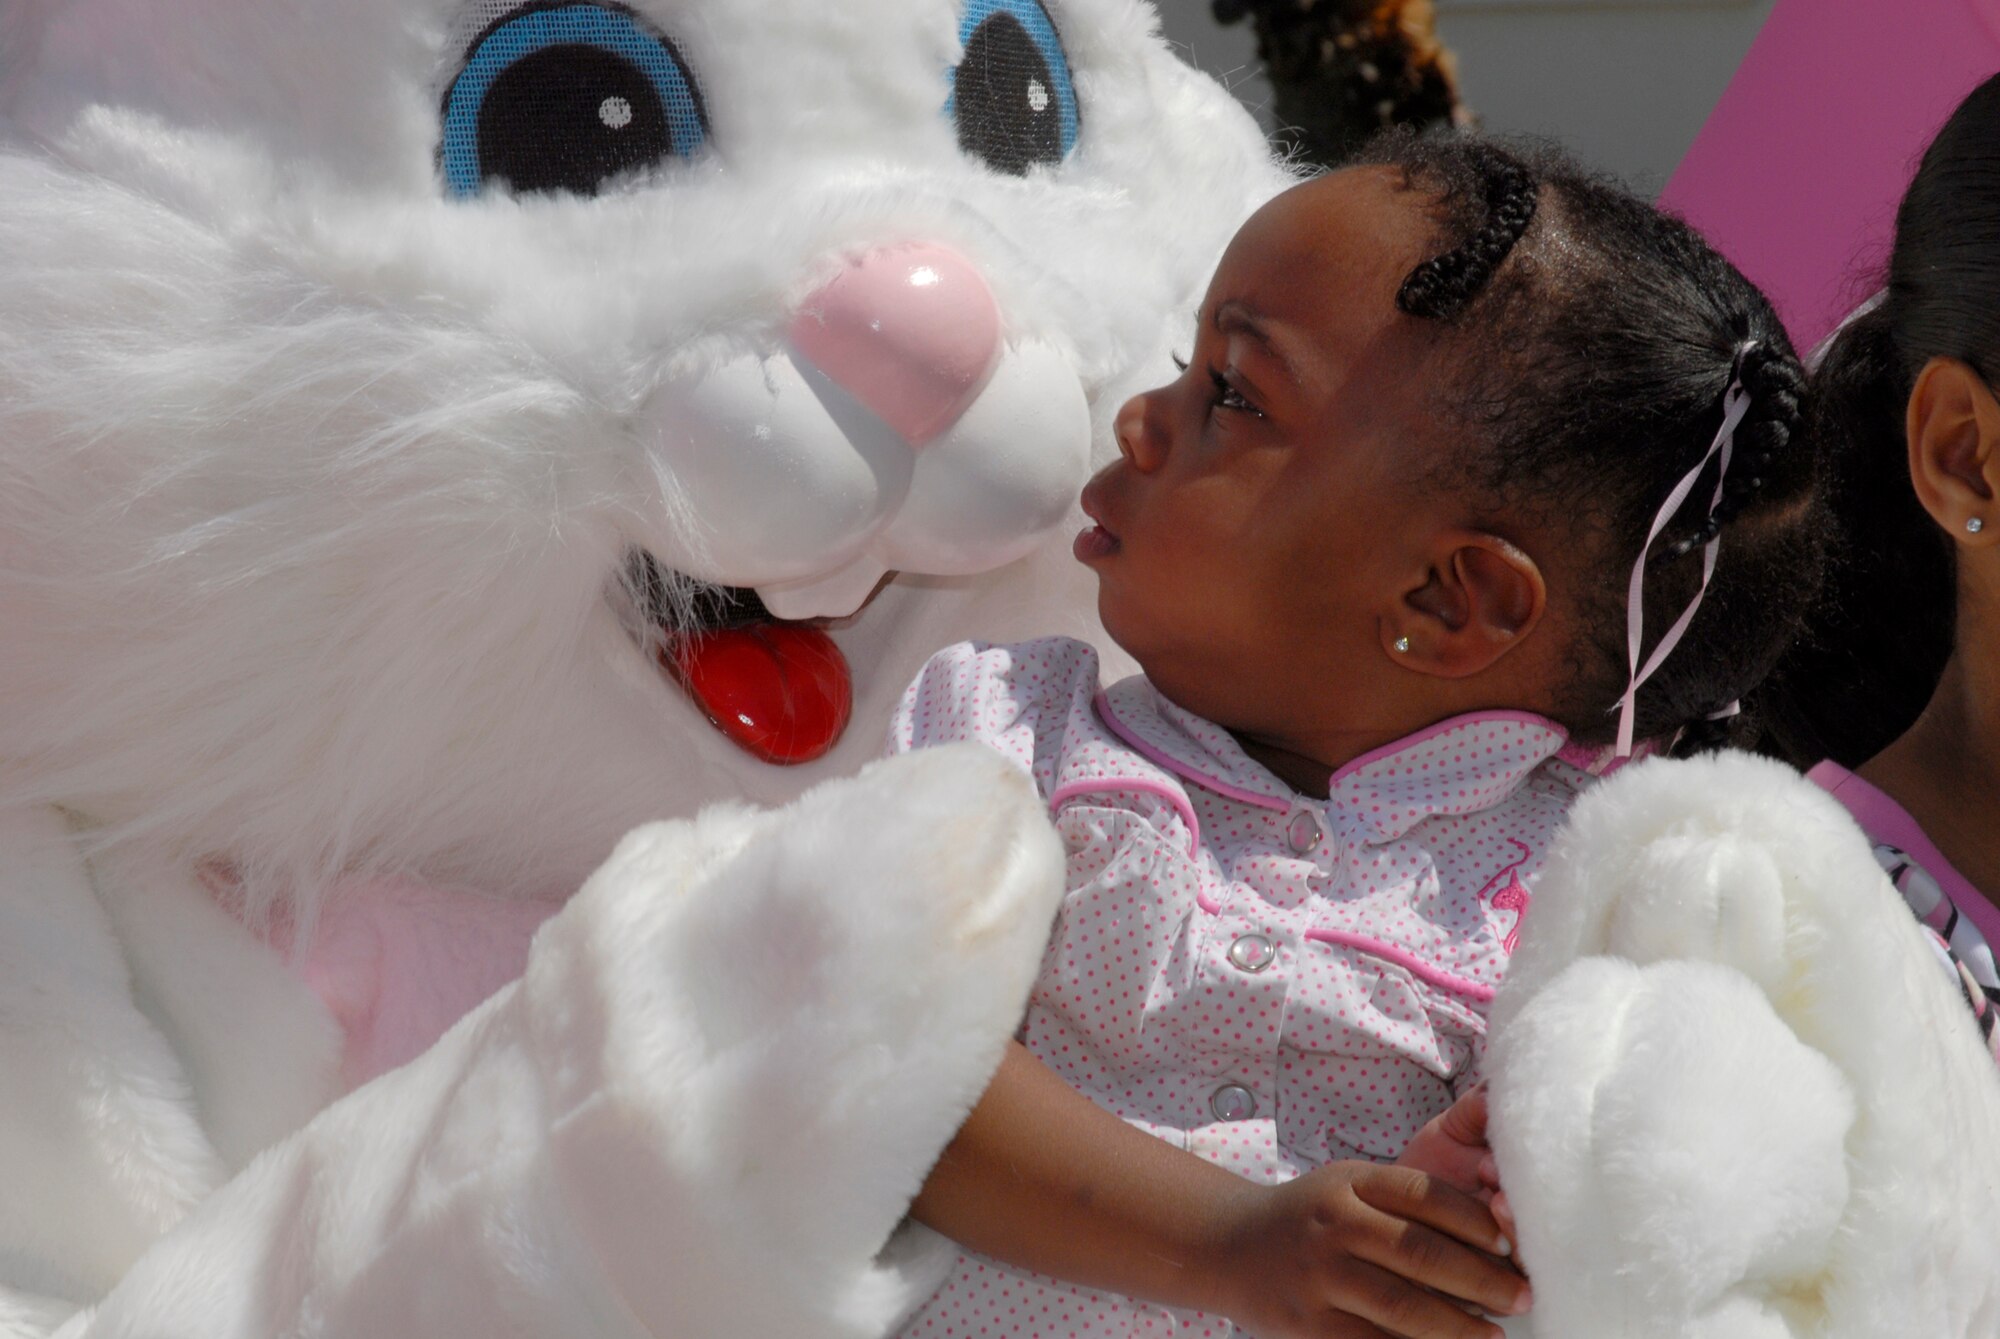 A petting zoo, magic show, Easter egg hunt and visit from the Easter Bunny were all part of the annual Easter celebration on Fort MacArthur March 22. (Photo by Joe Juarez)